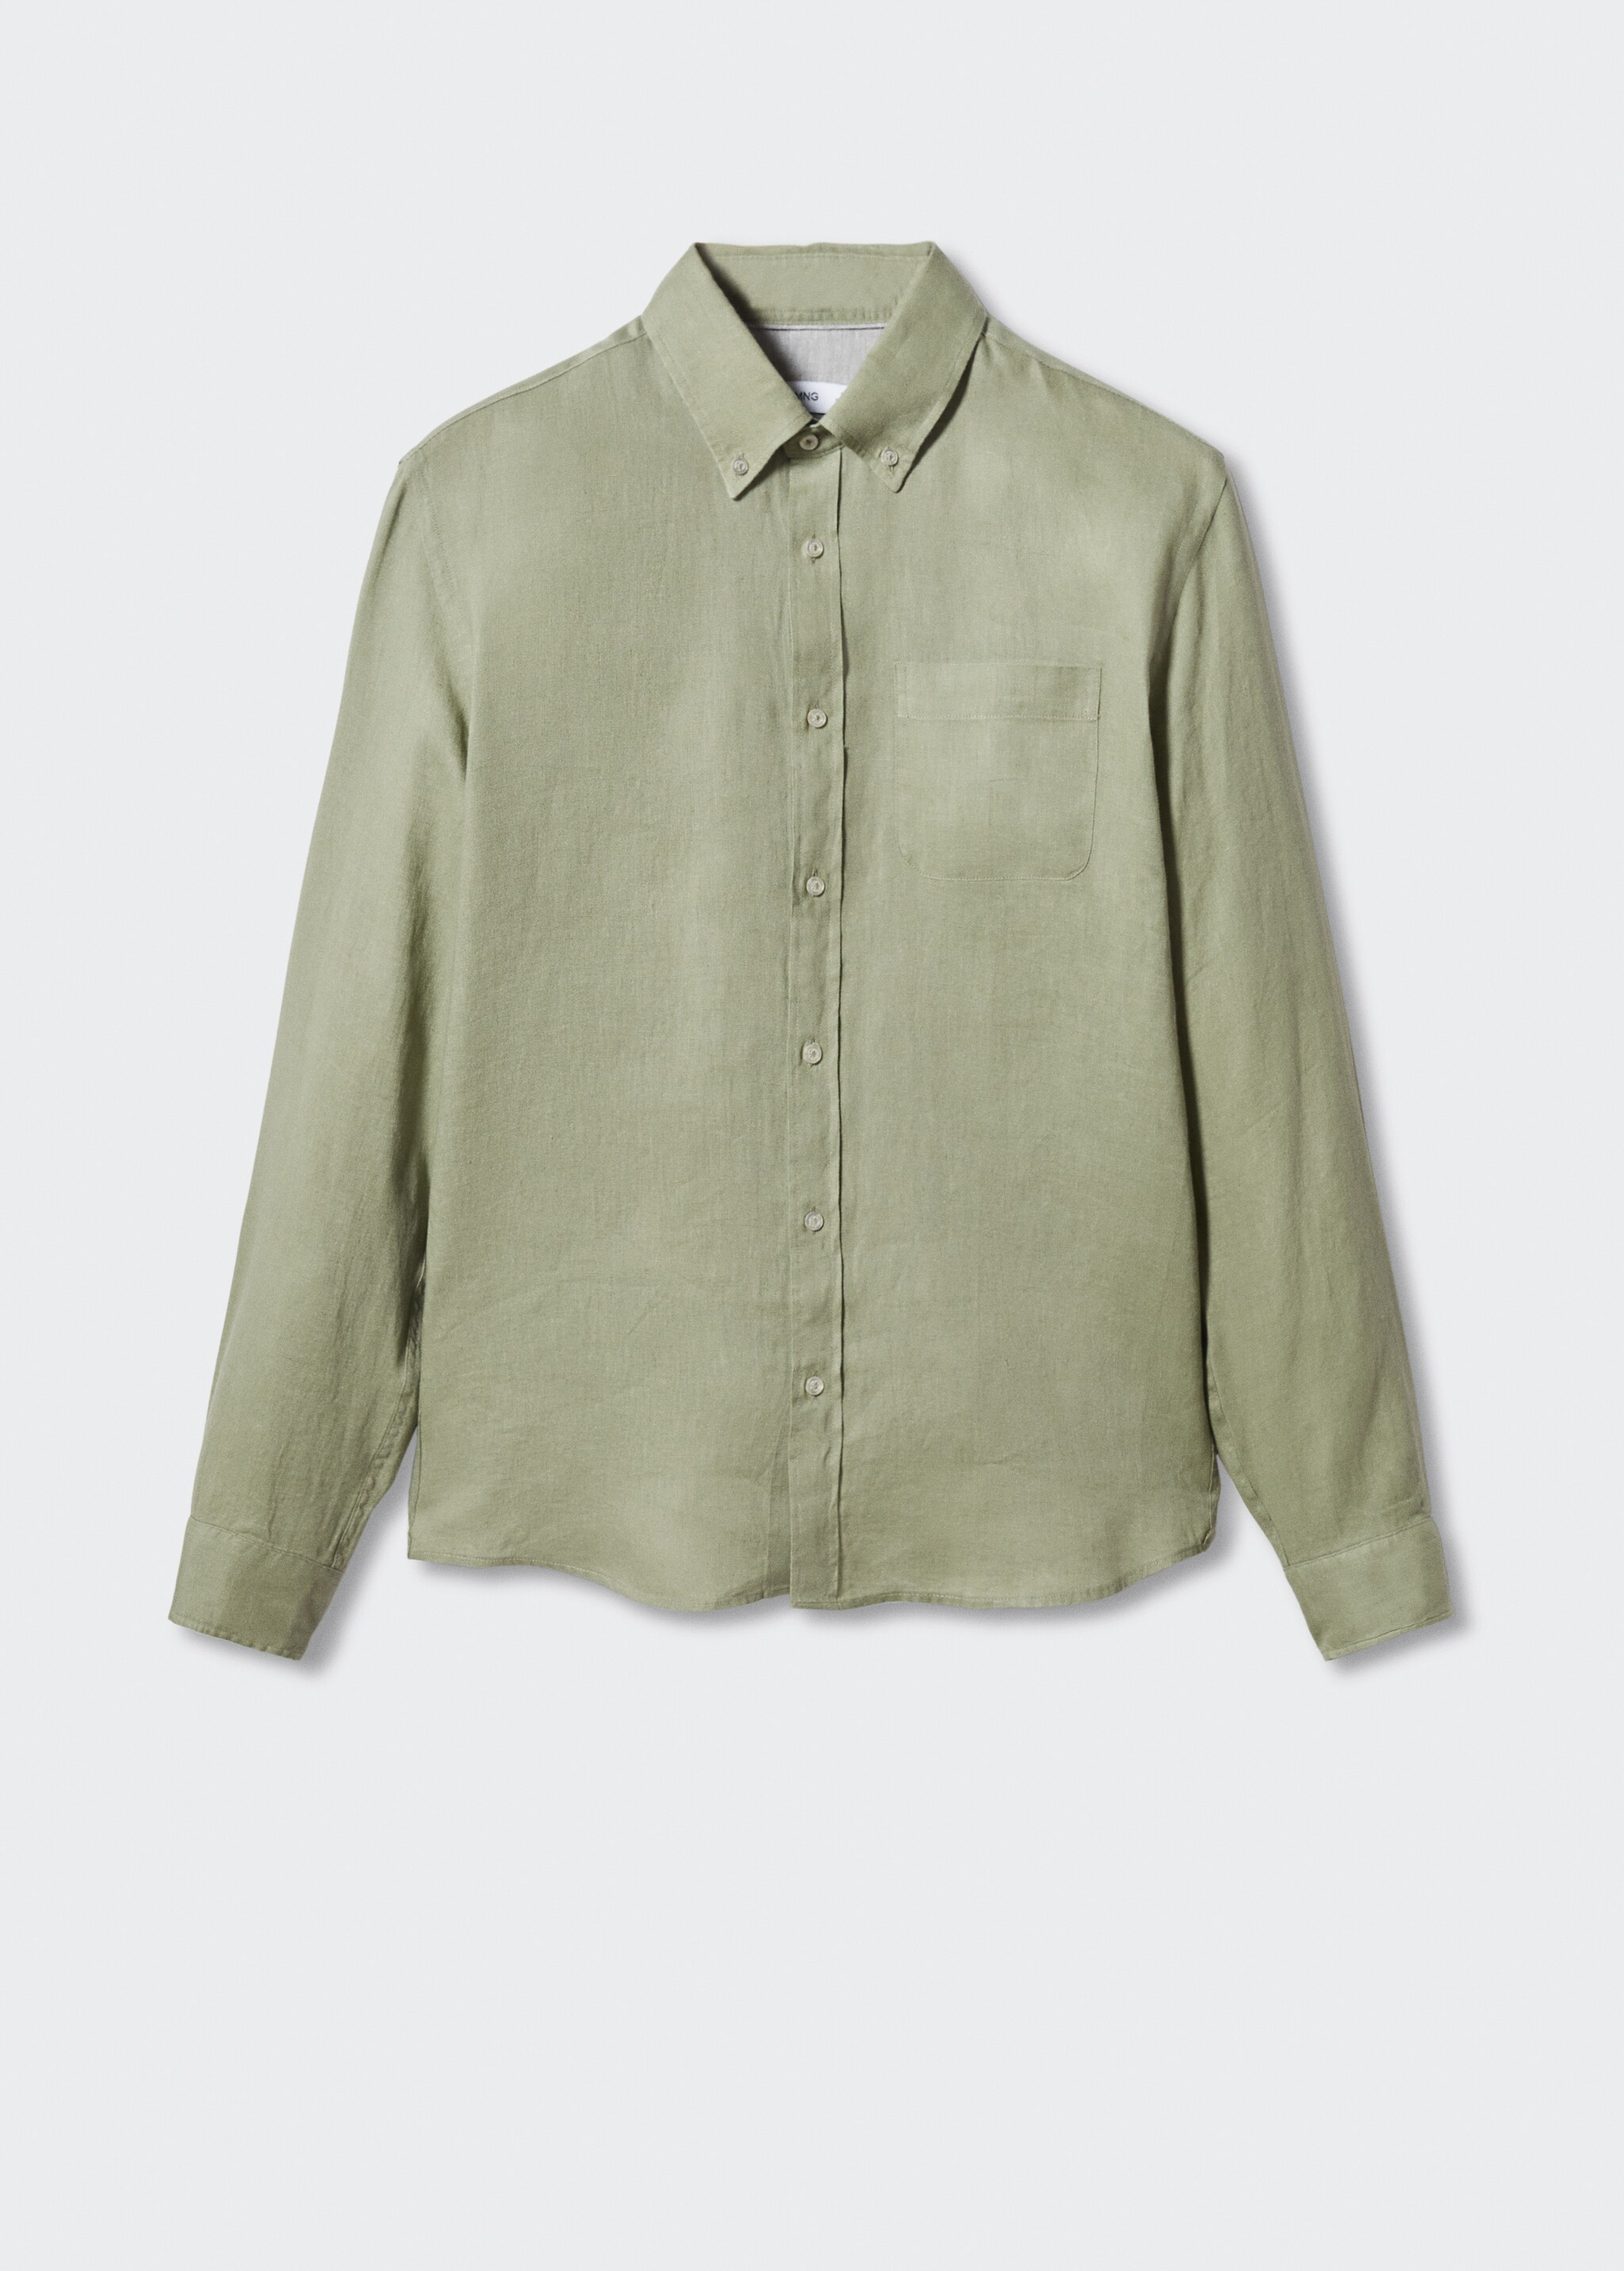 MAN/ 100% linen slim-fit shirt  - Article without model